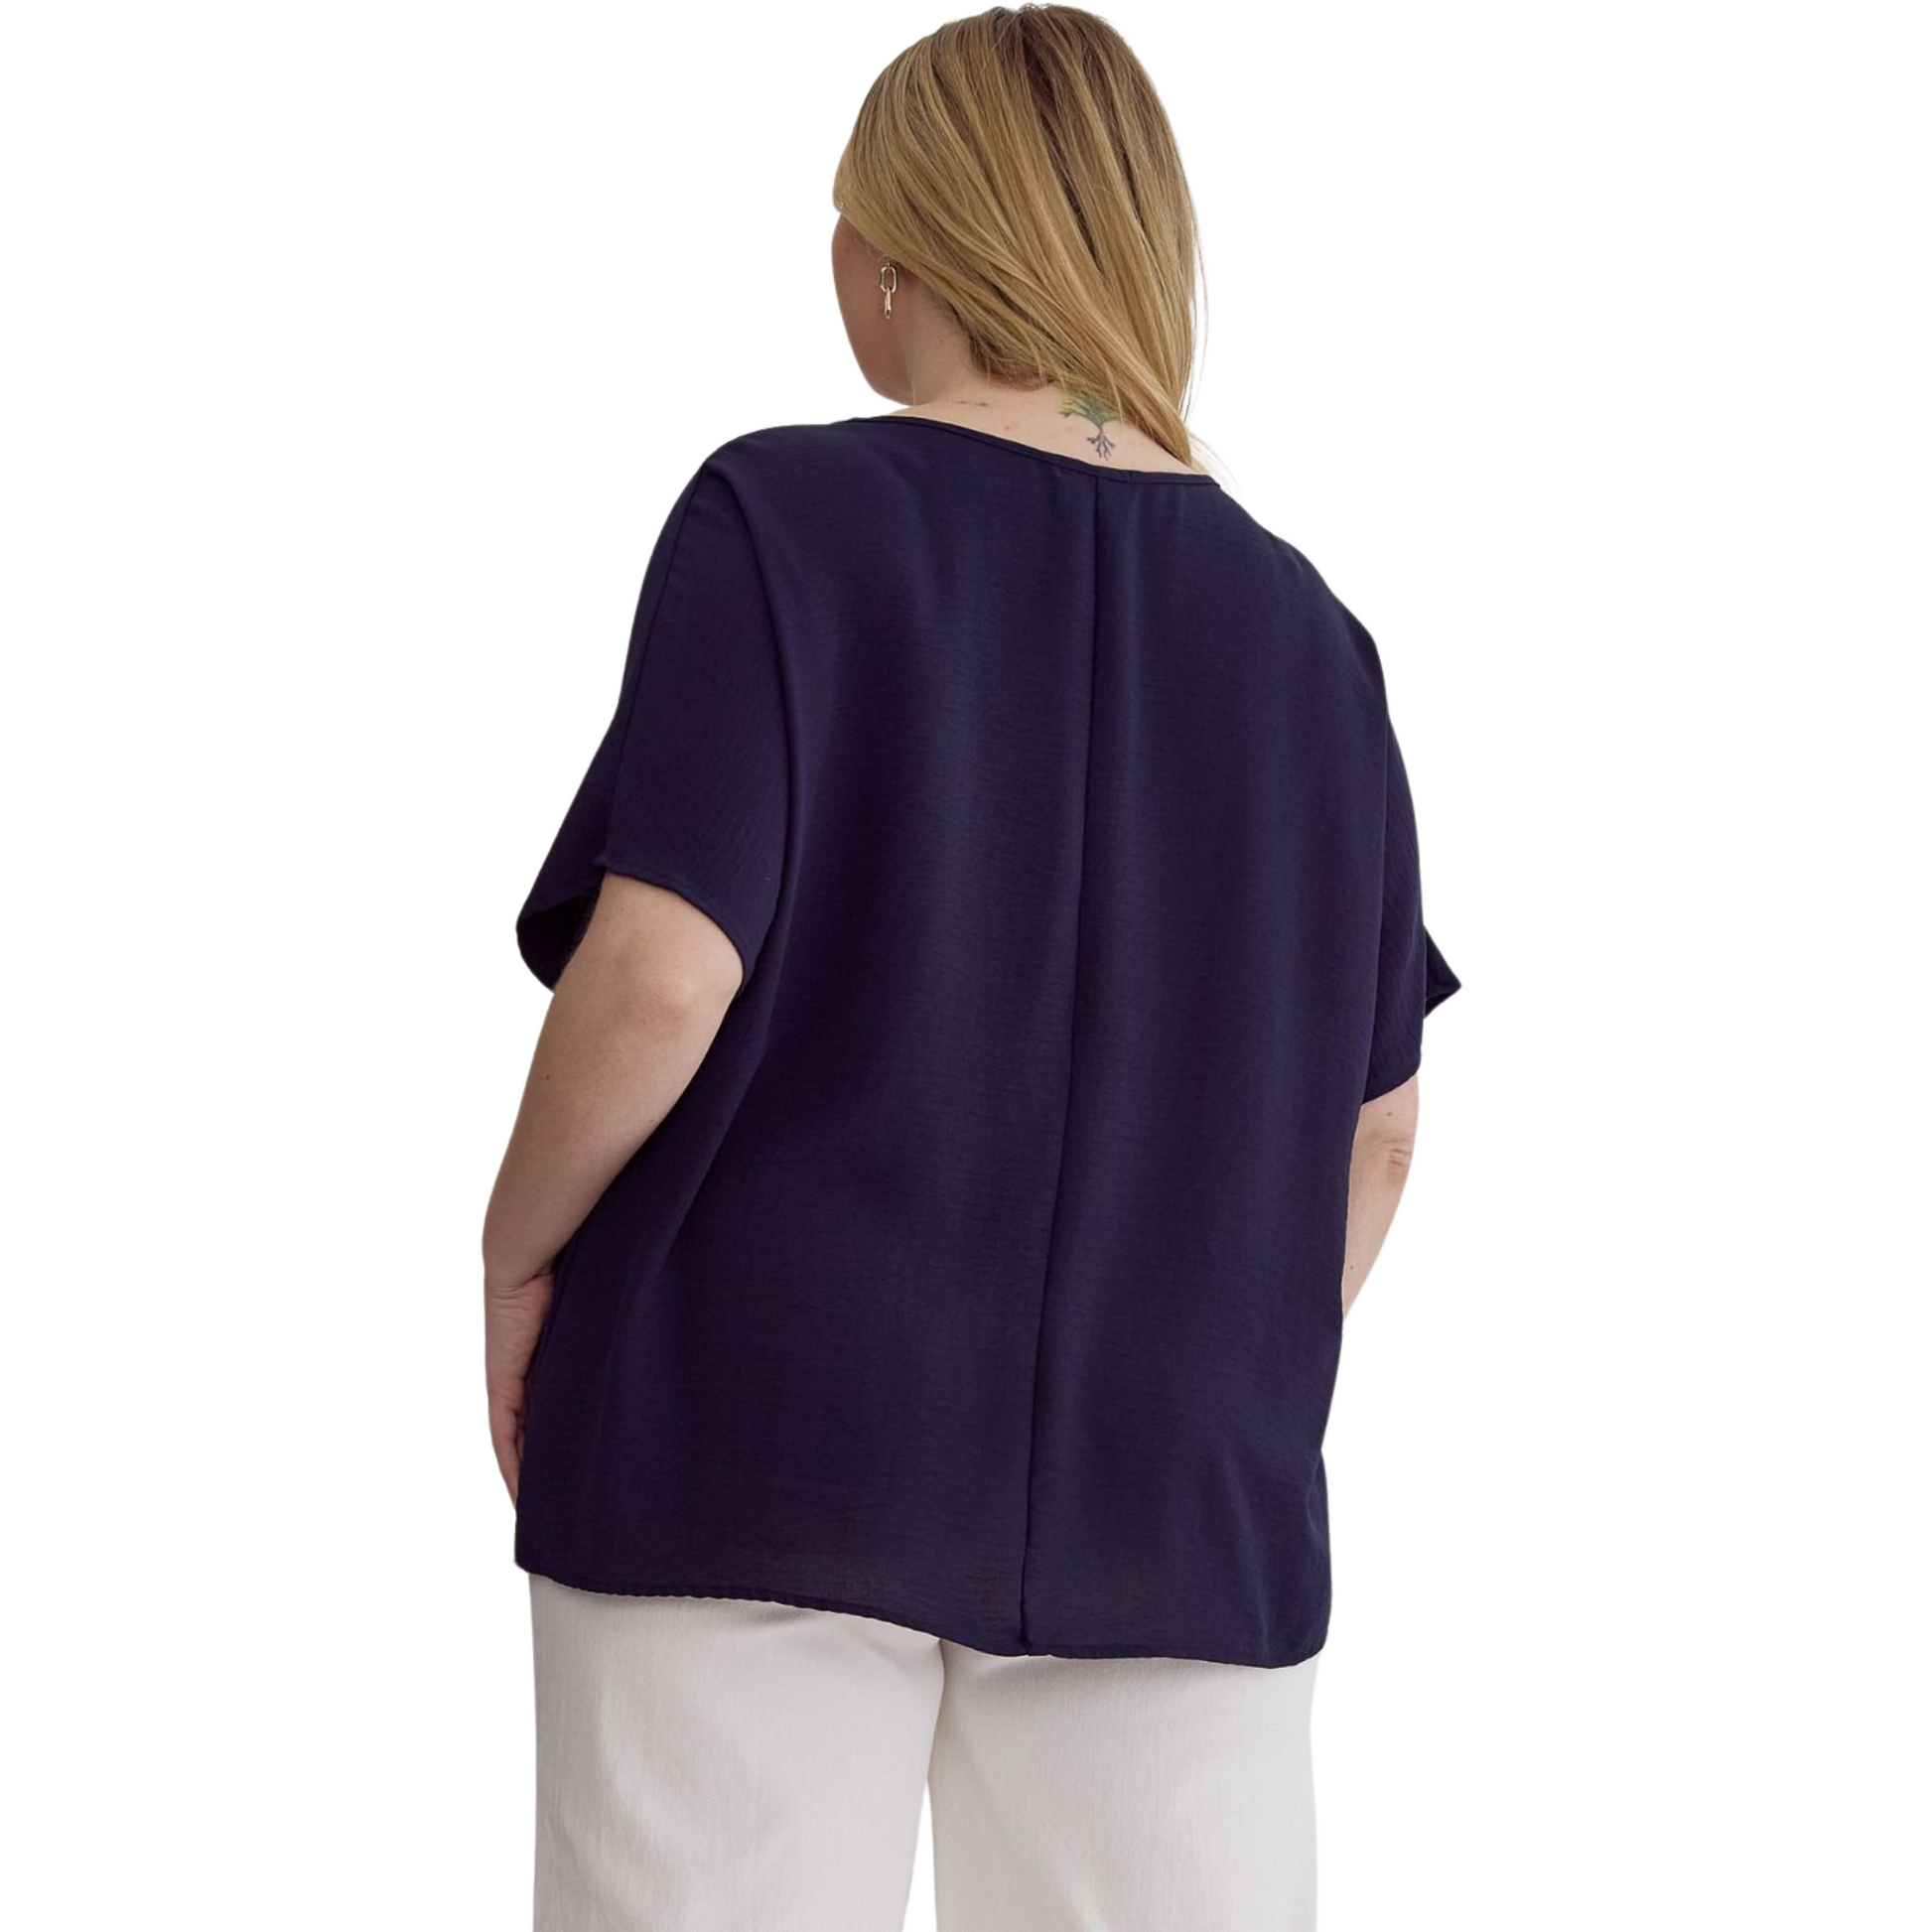 This solid v-neck top is perfect for those who prefer a little extra coverage. The asymmetrical rounded hem detail and semi-sheer fabric add a touch of style, while the lightweight woven material keeps you comfortable all day long. Available in navy and plus size.